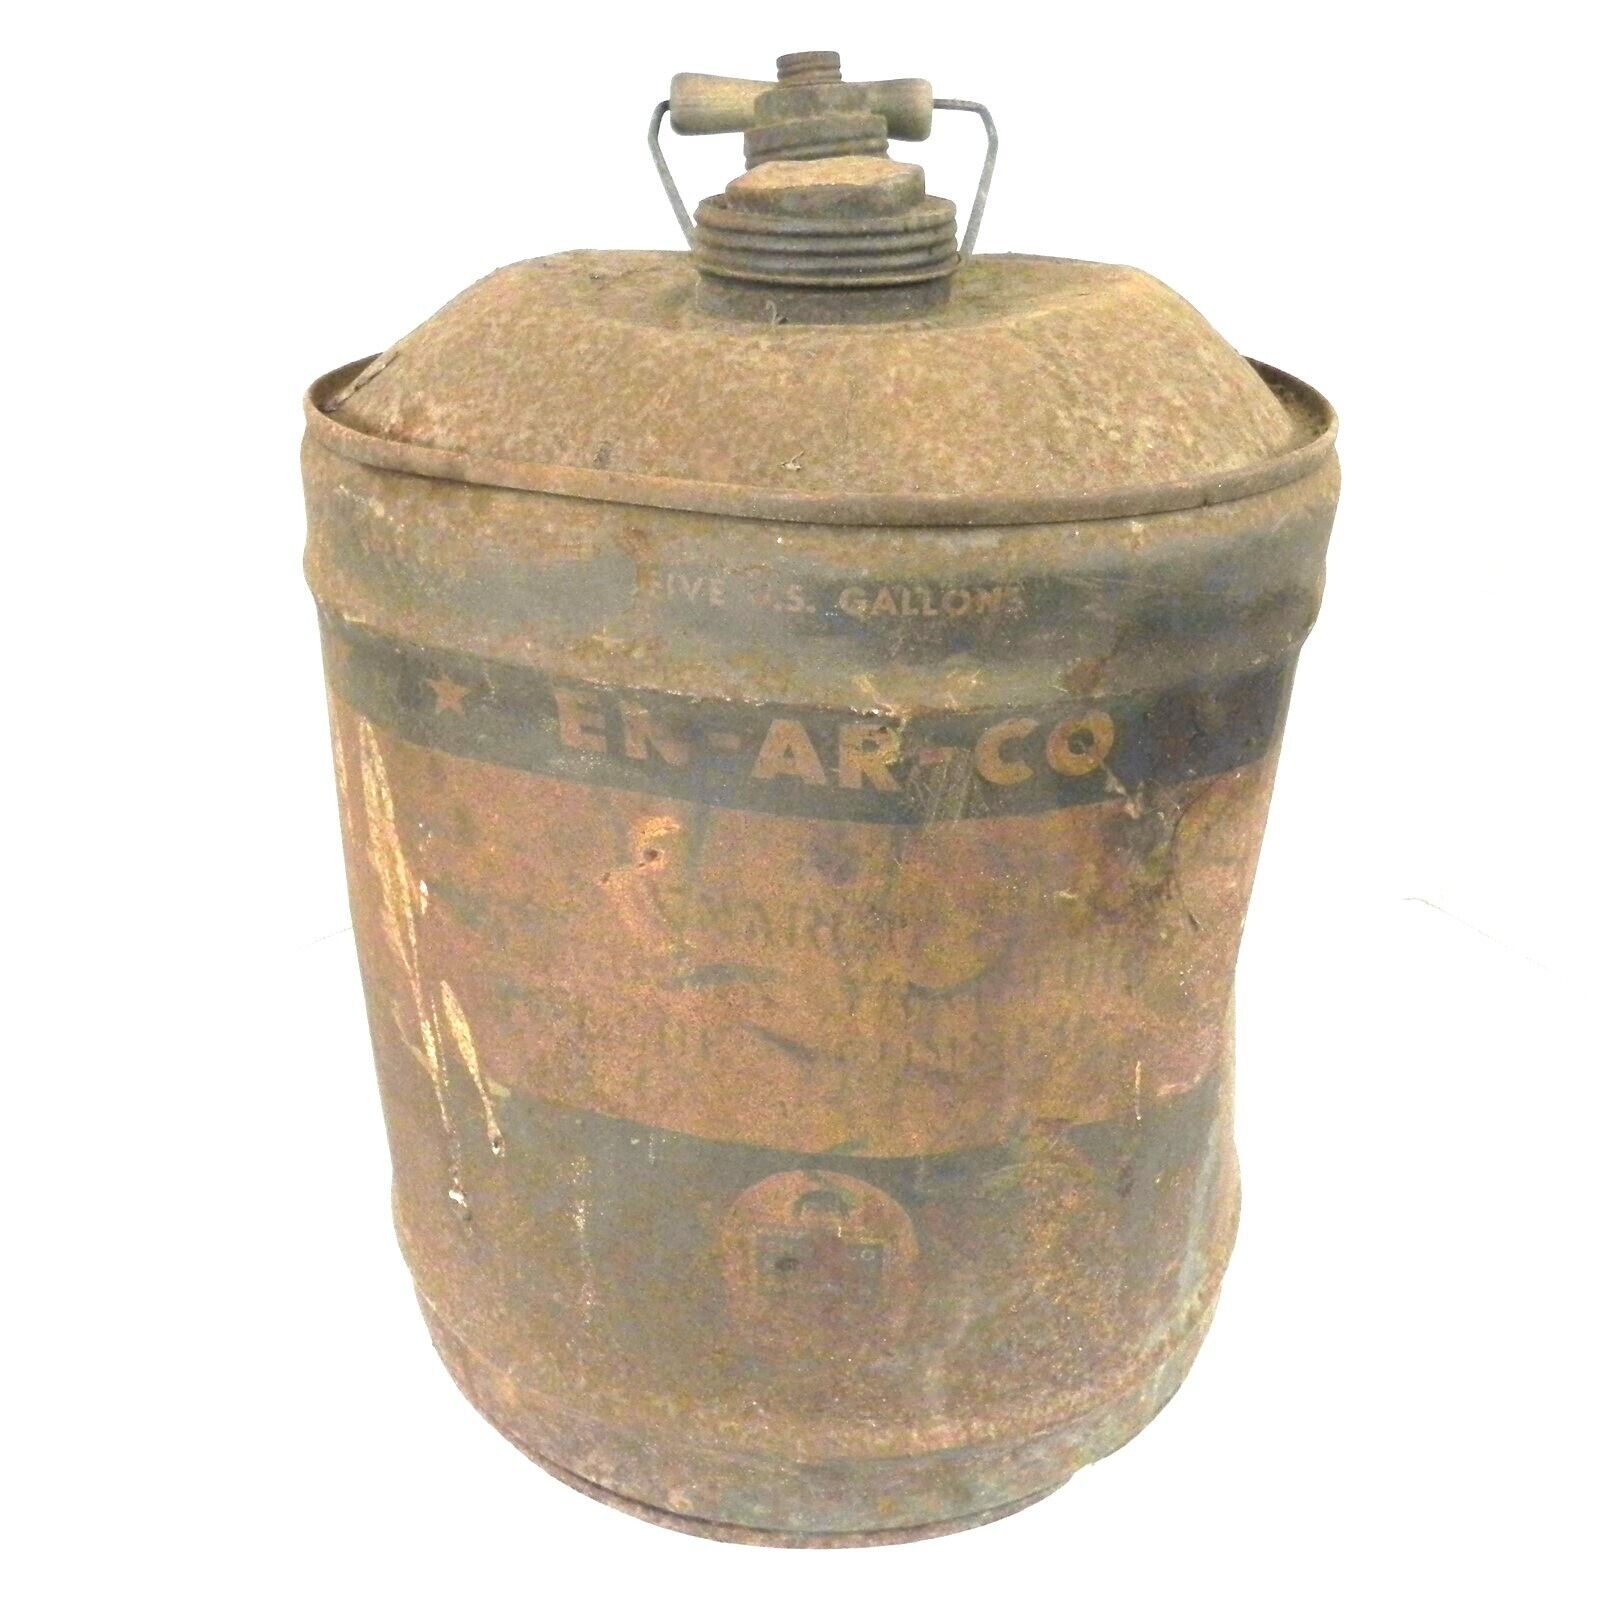 VINTAGE EN-AR-CO 5 GALLON CAN EMPTY W/WOODEN HANDLE USED HEAVY SURFACE RUST VTG